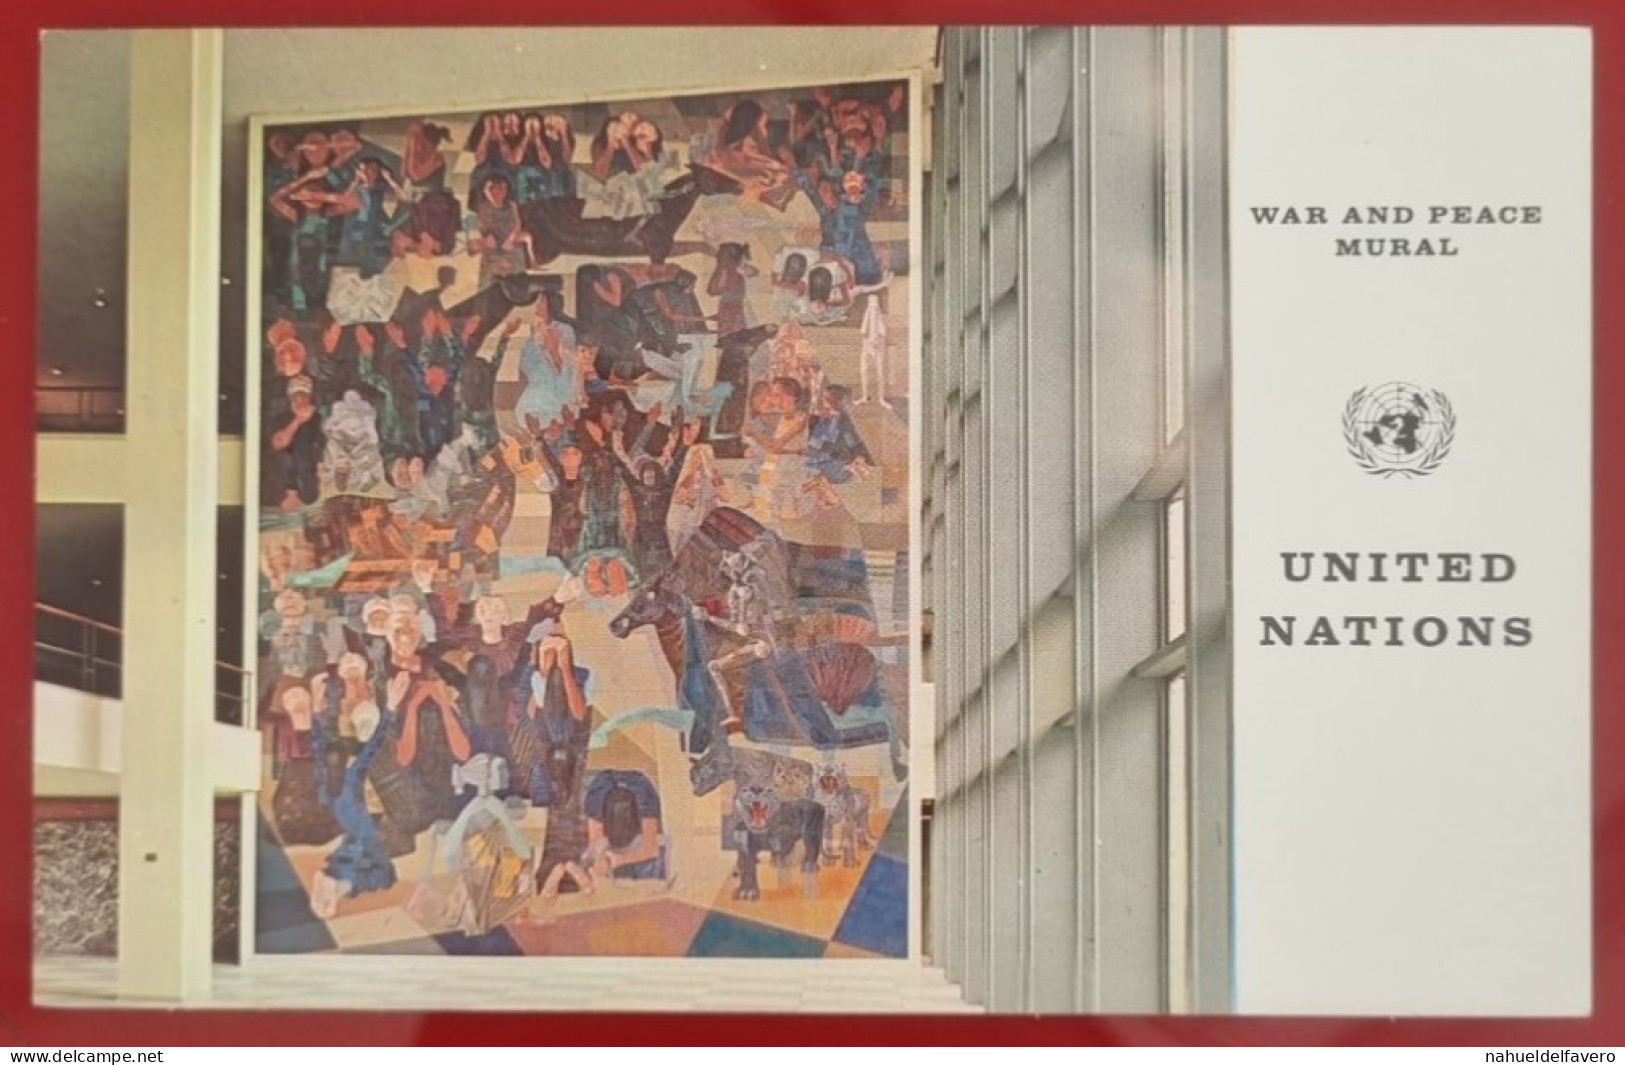 Uncirculated Postcard - USA - NY, NEW YORK CITY - UNITED NATIONS, ONE OF THE TWO MURALS, "WAR" AND "PEACE" BY PORTINARI - Places & Squares